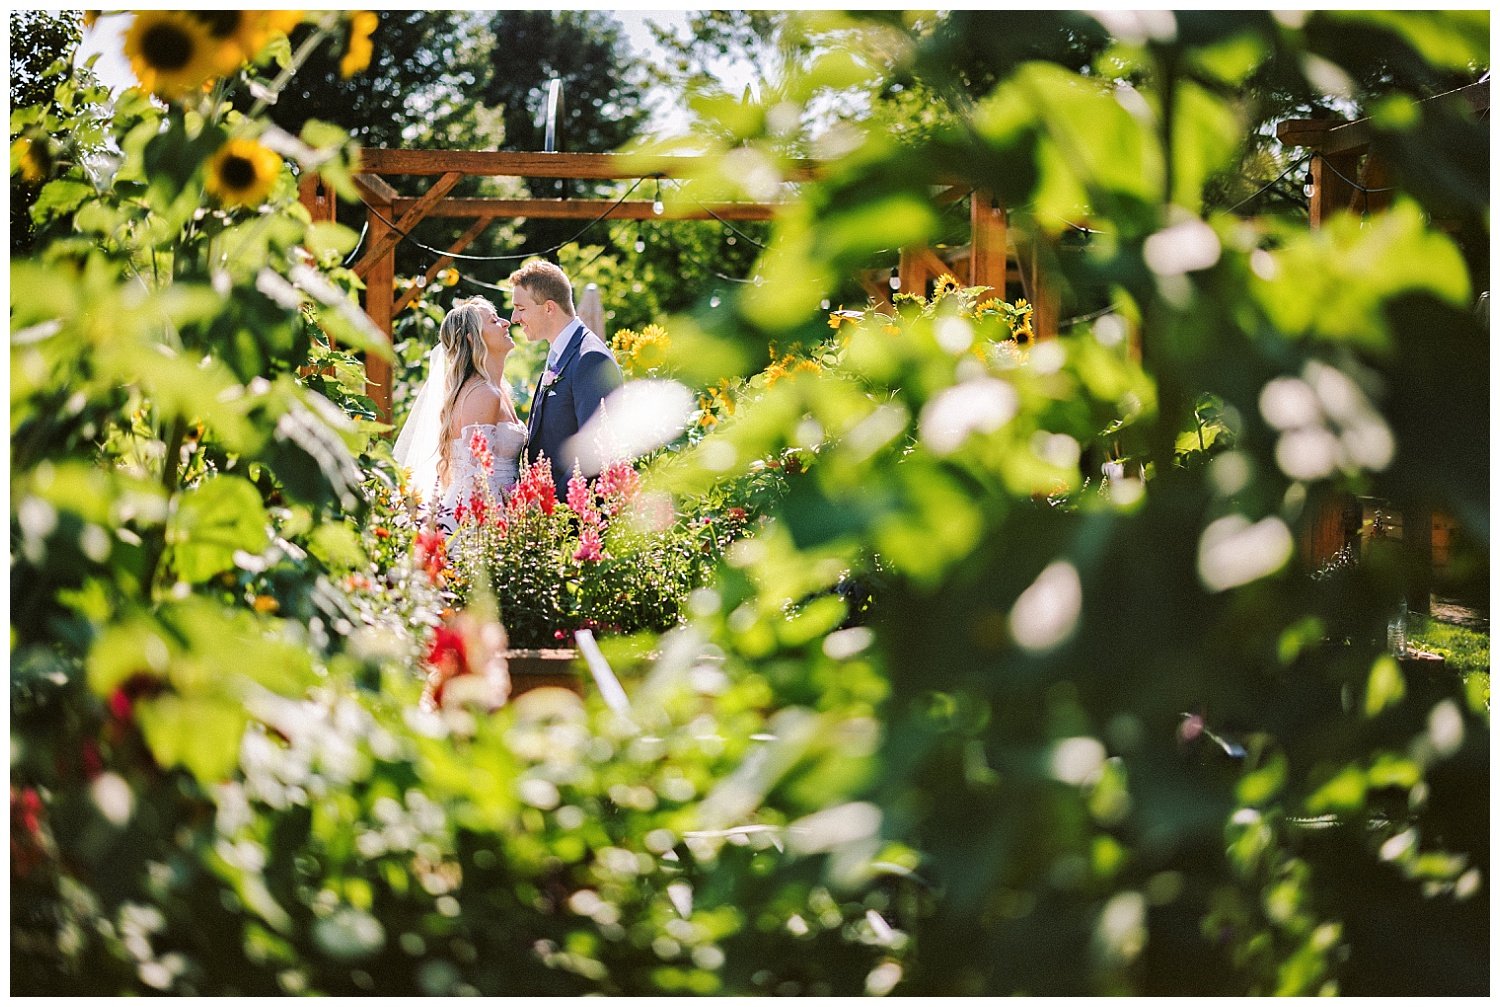  A bride and groom posing for wedding photos at the Farm at Harvest Hills.  They are framed by beautiful greenery and plants. 